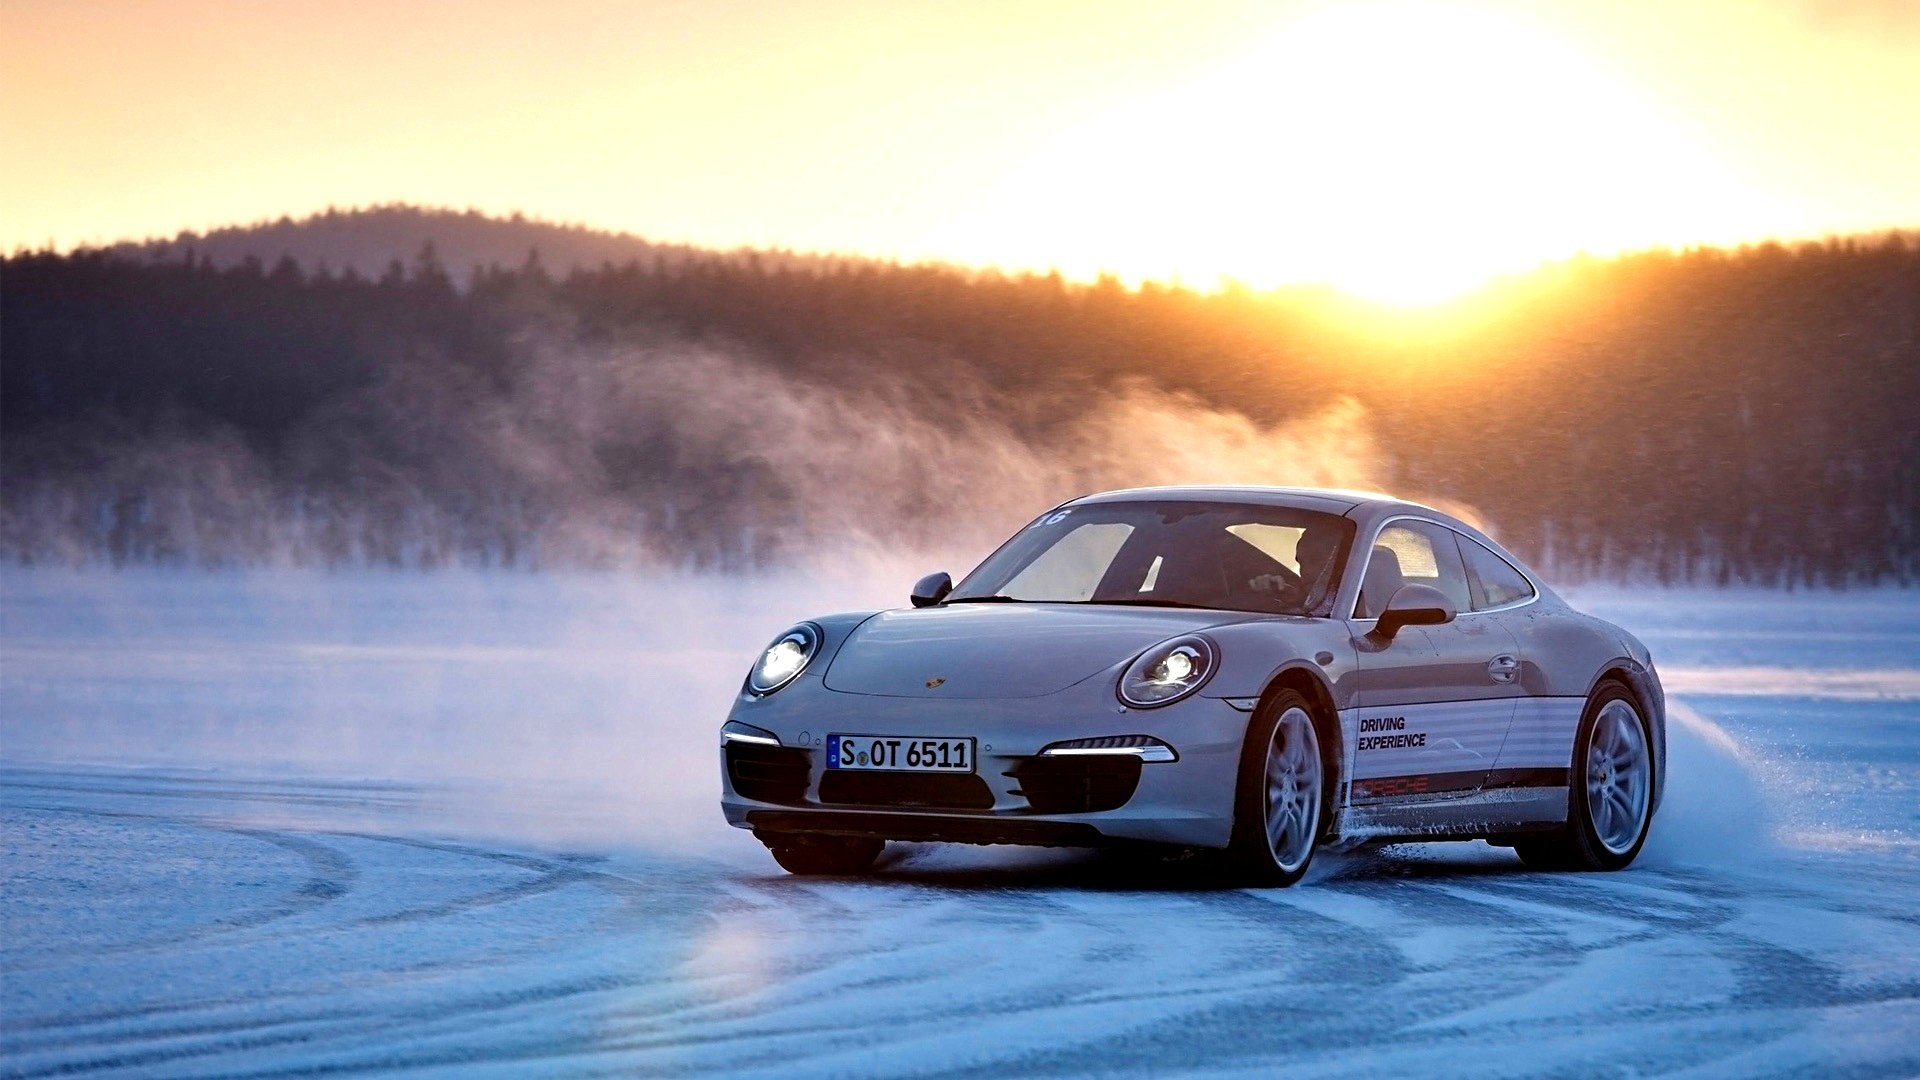 Porsche Turbo Wallpaper And Background Image